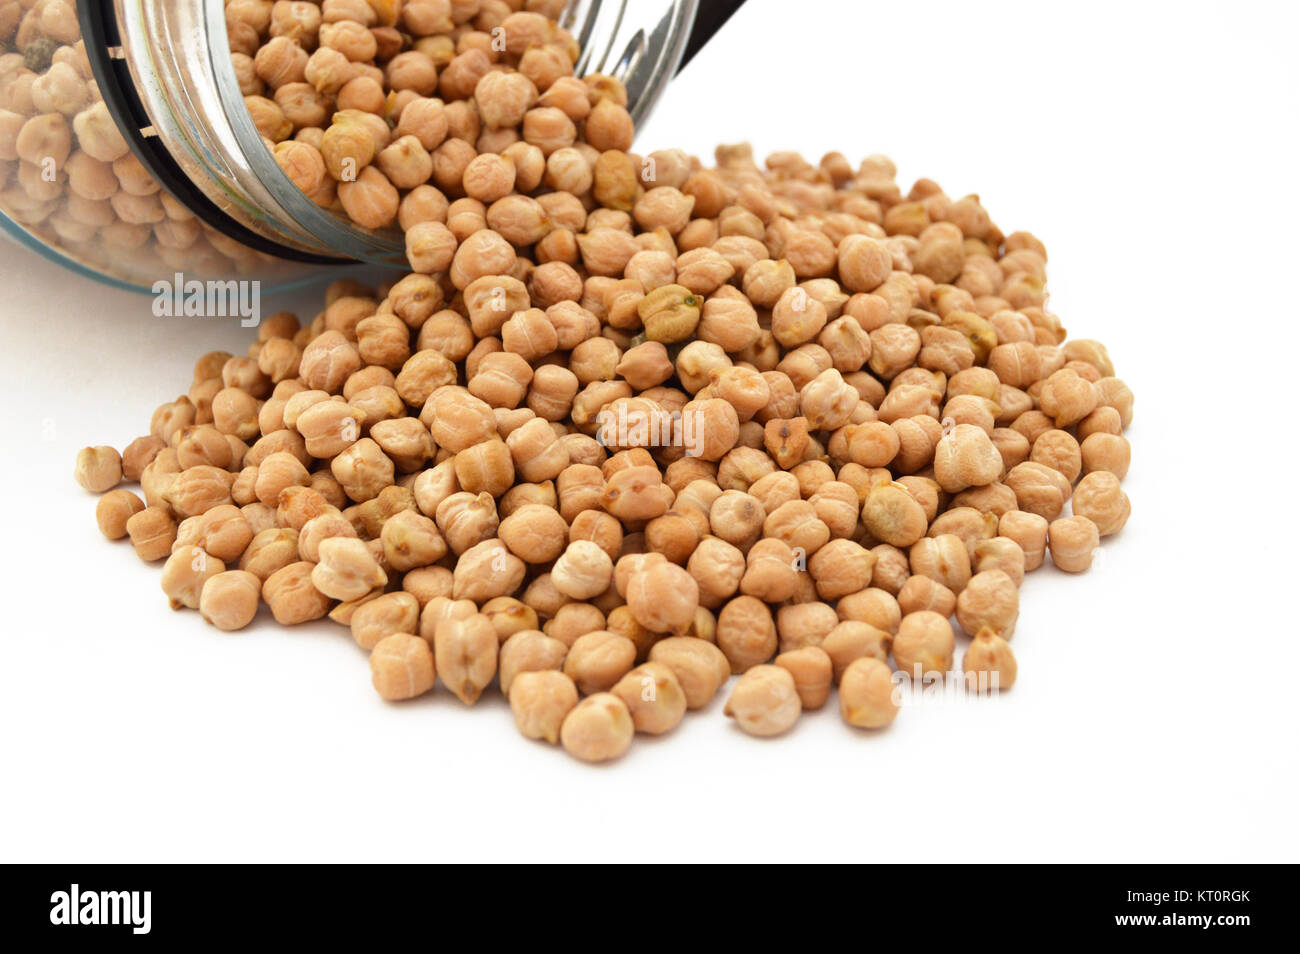 dry chickpea pictures Stock Photo